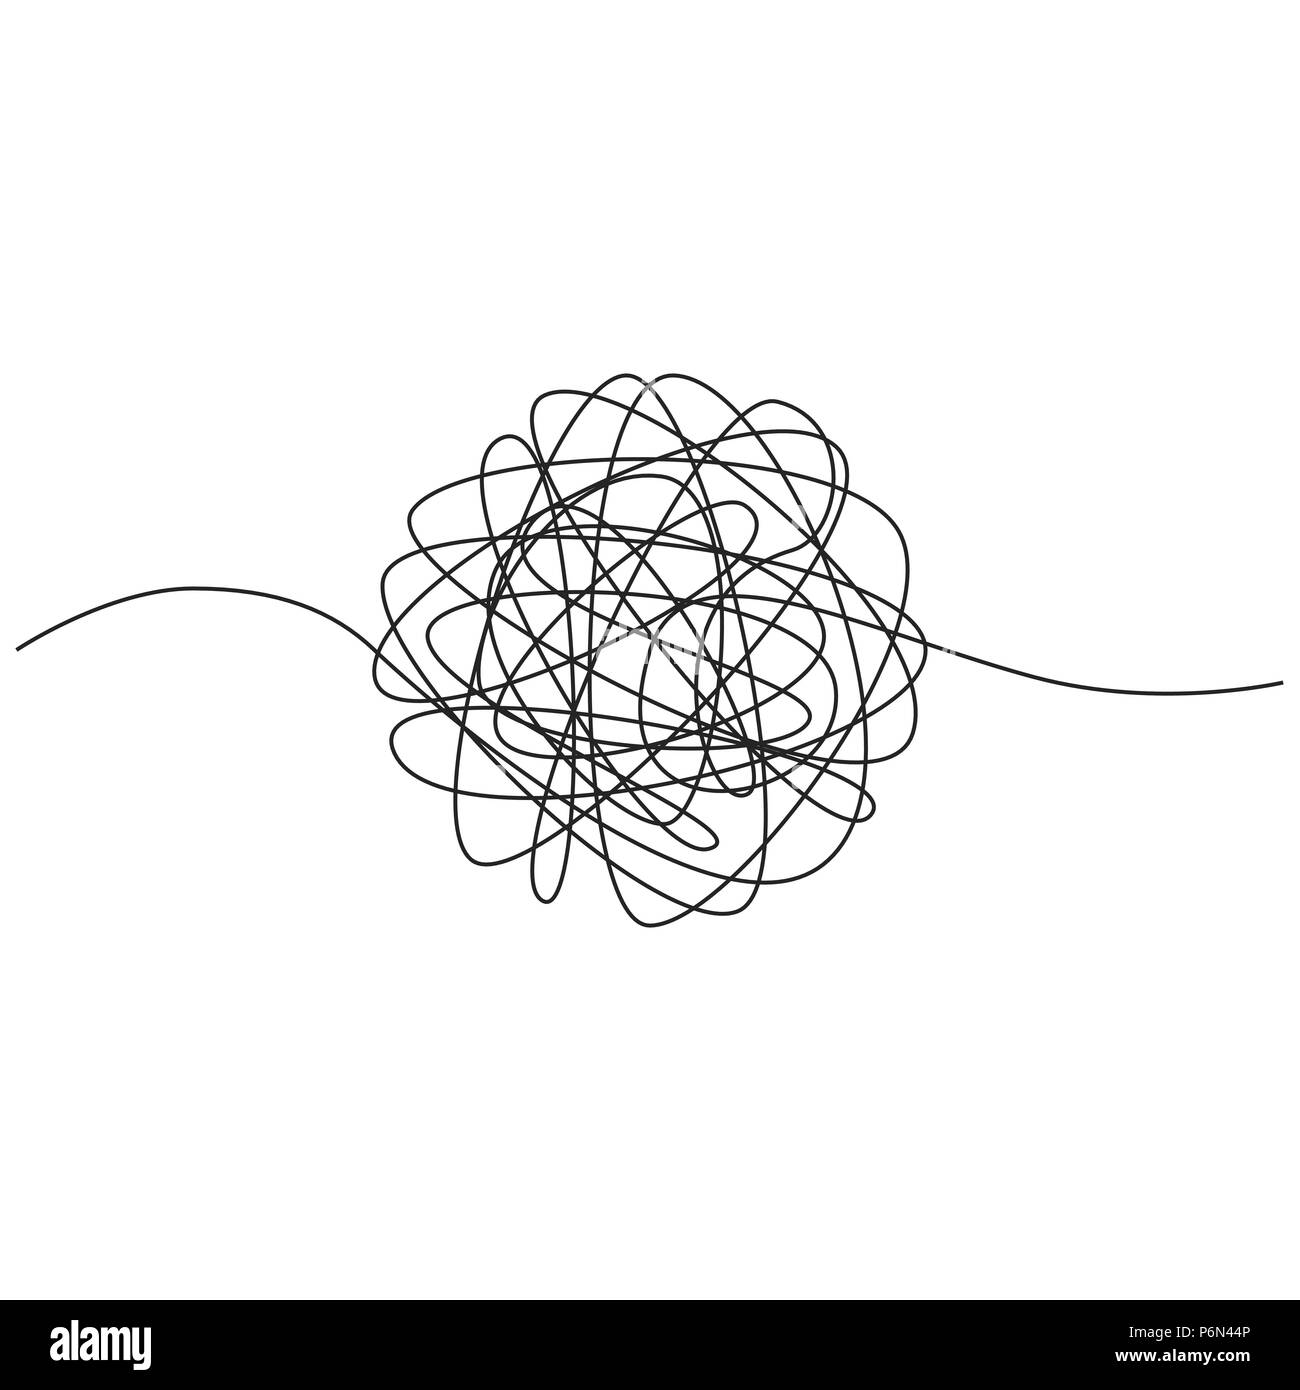 Hand drawn tangle of tangled thread. Sketch spherical abstract scribble shape. Vector illustration isolated on white background Stock Vector